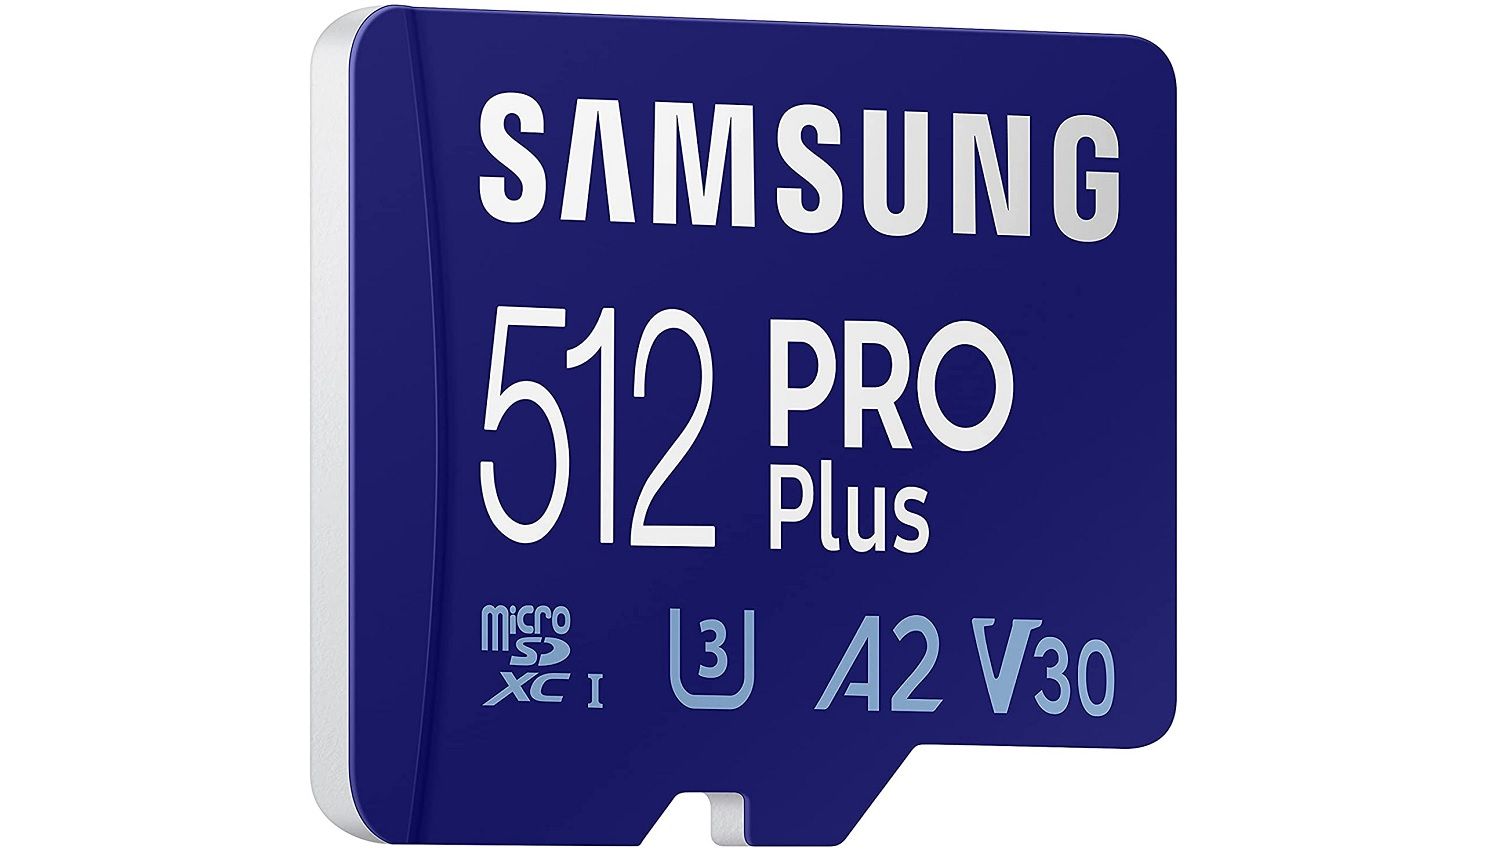 samsung pro plus microsd card tilted to the side